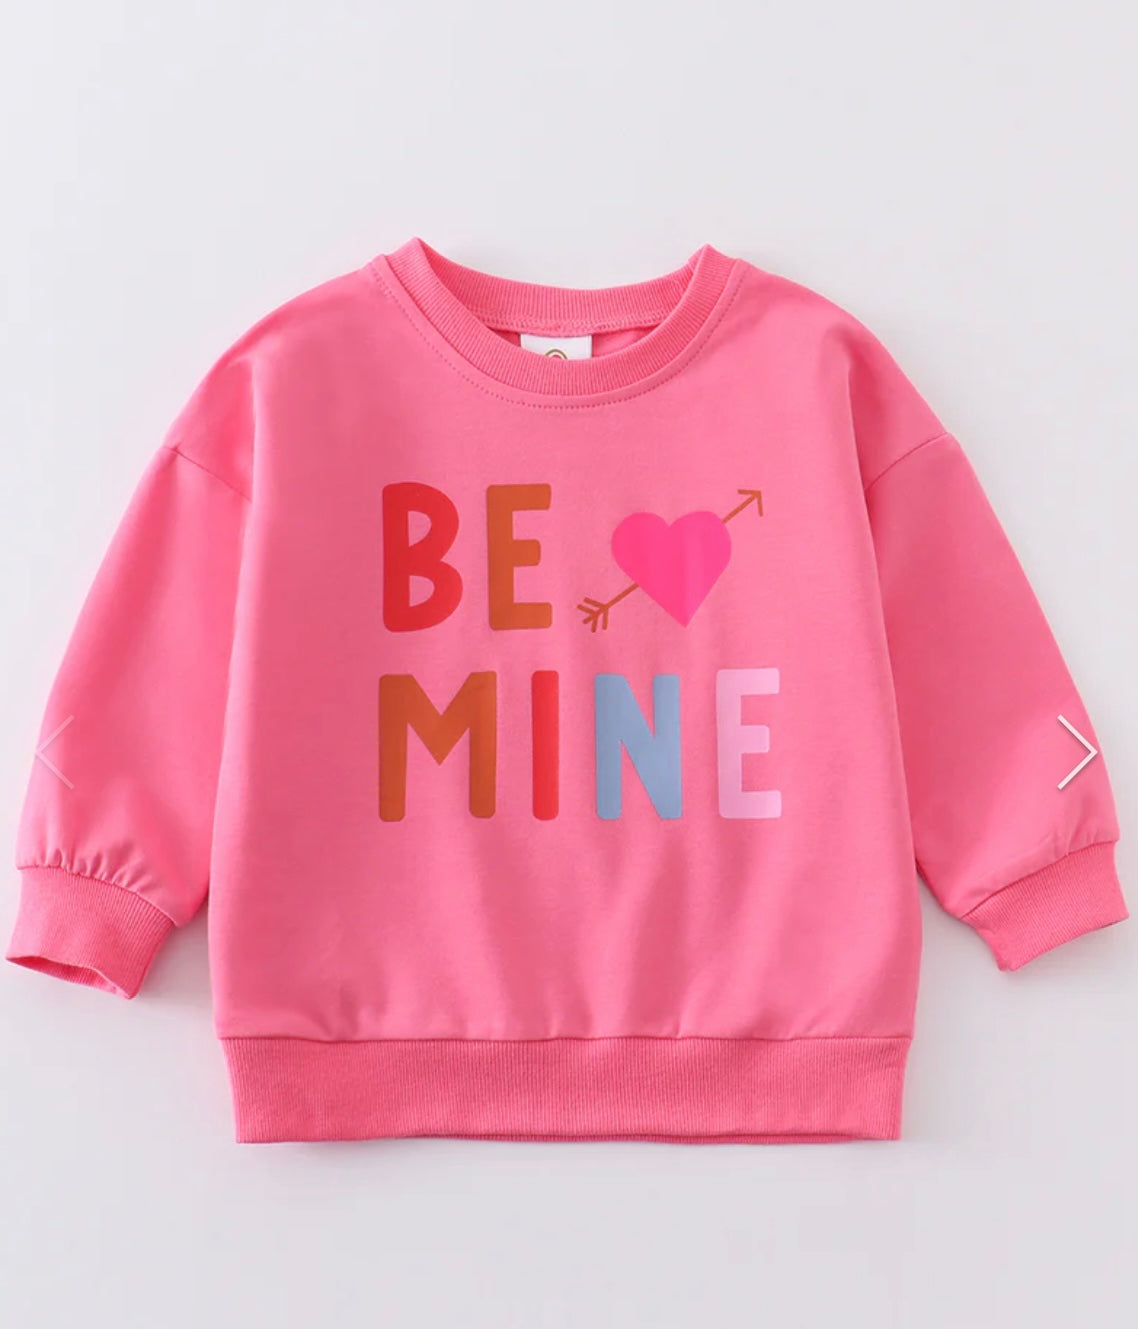 “Be Mine” pullover